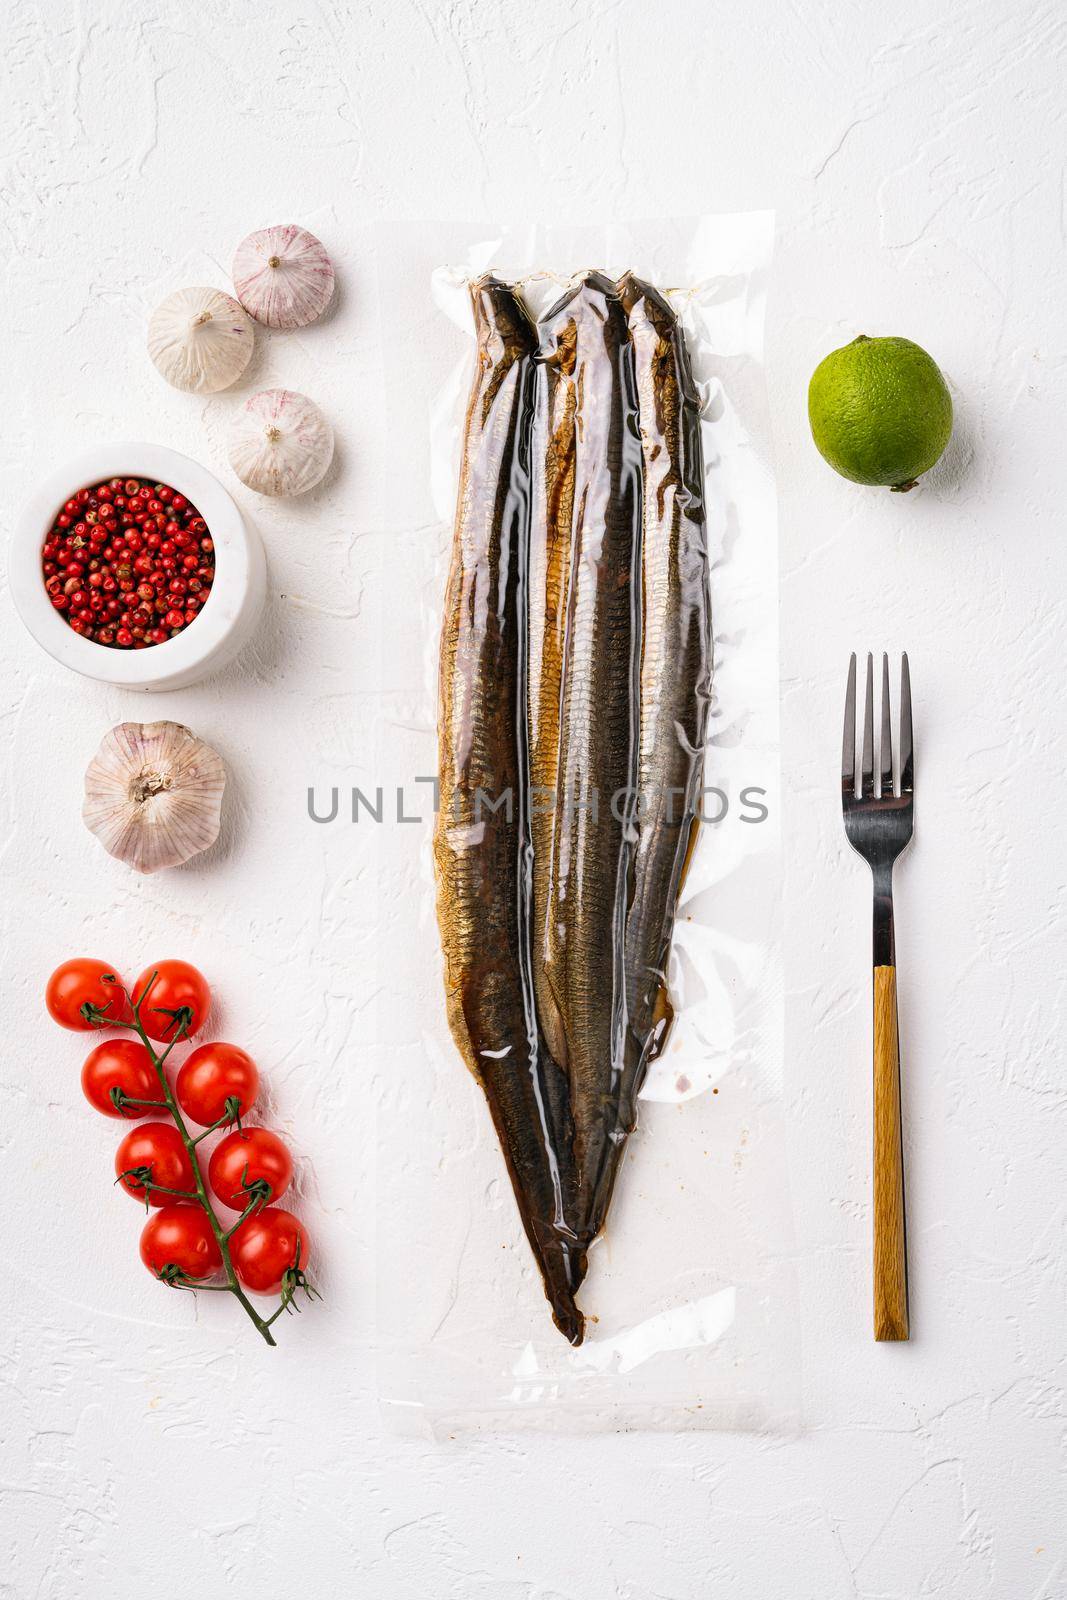 Smoked Lamprey seafood delicacy vacuum pack, on white stone table background, top view flat lay by Ilianesolenyi